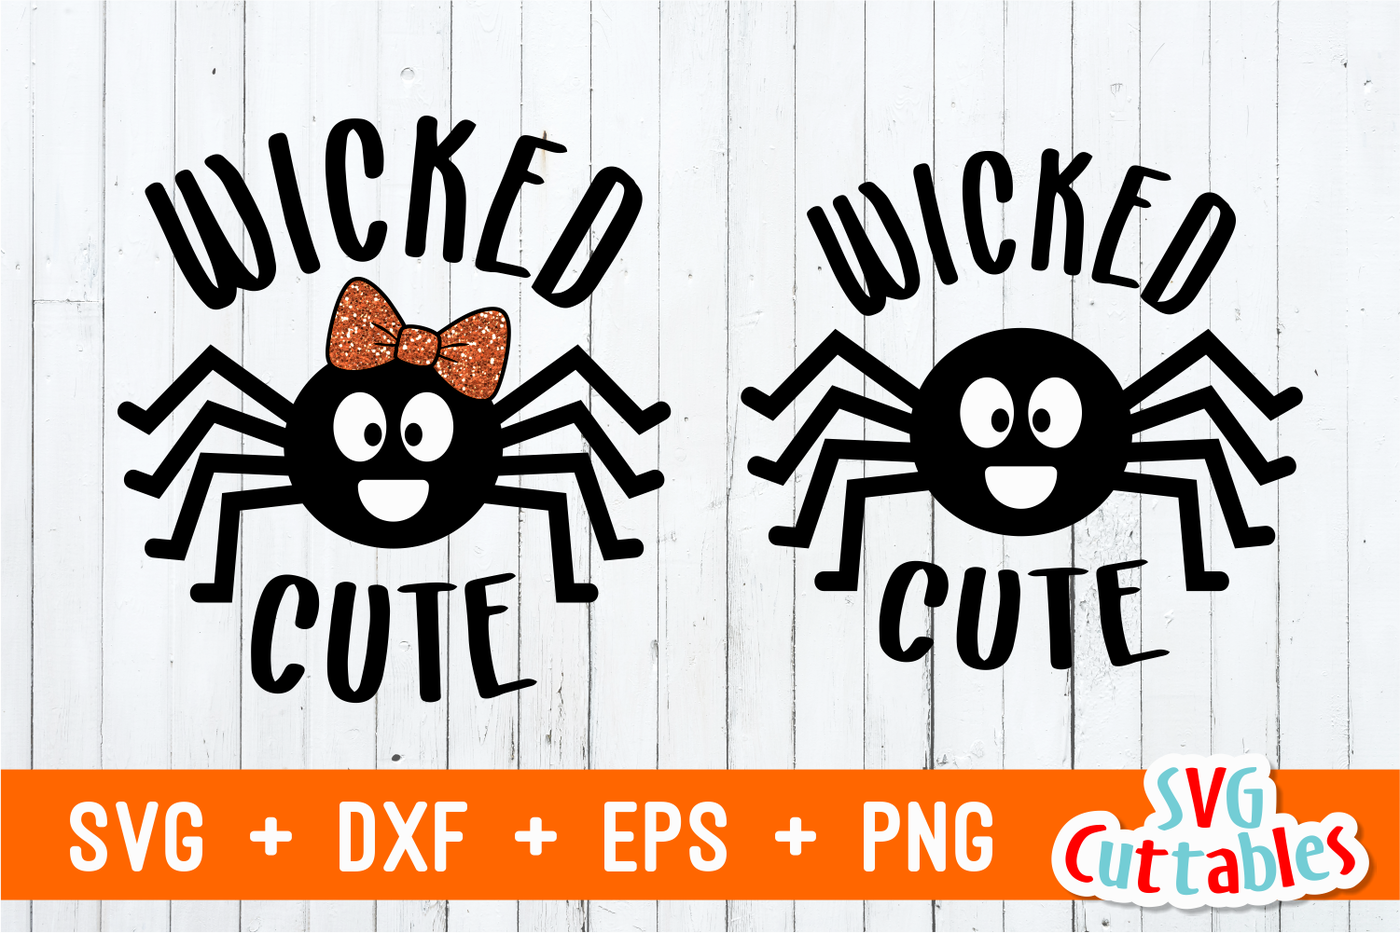 Wicked Cute Halloween Cut File By Svg Cuttables Thehungryjpeg Com